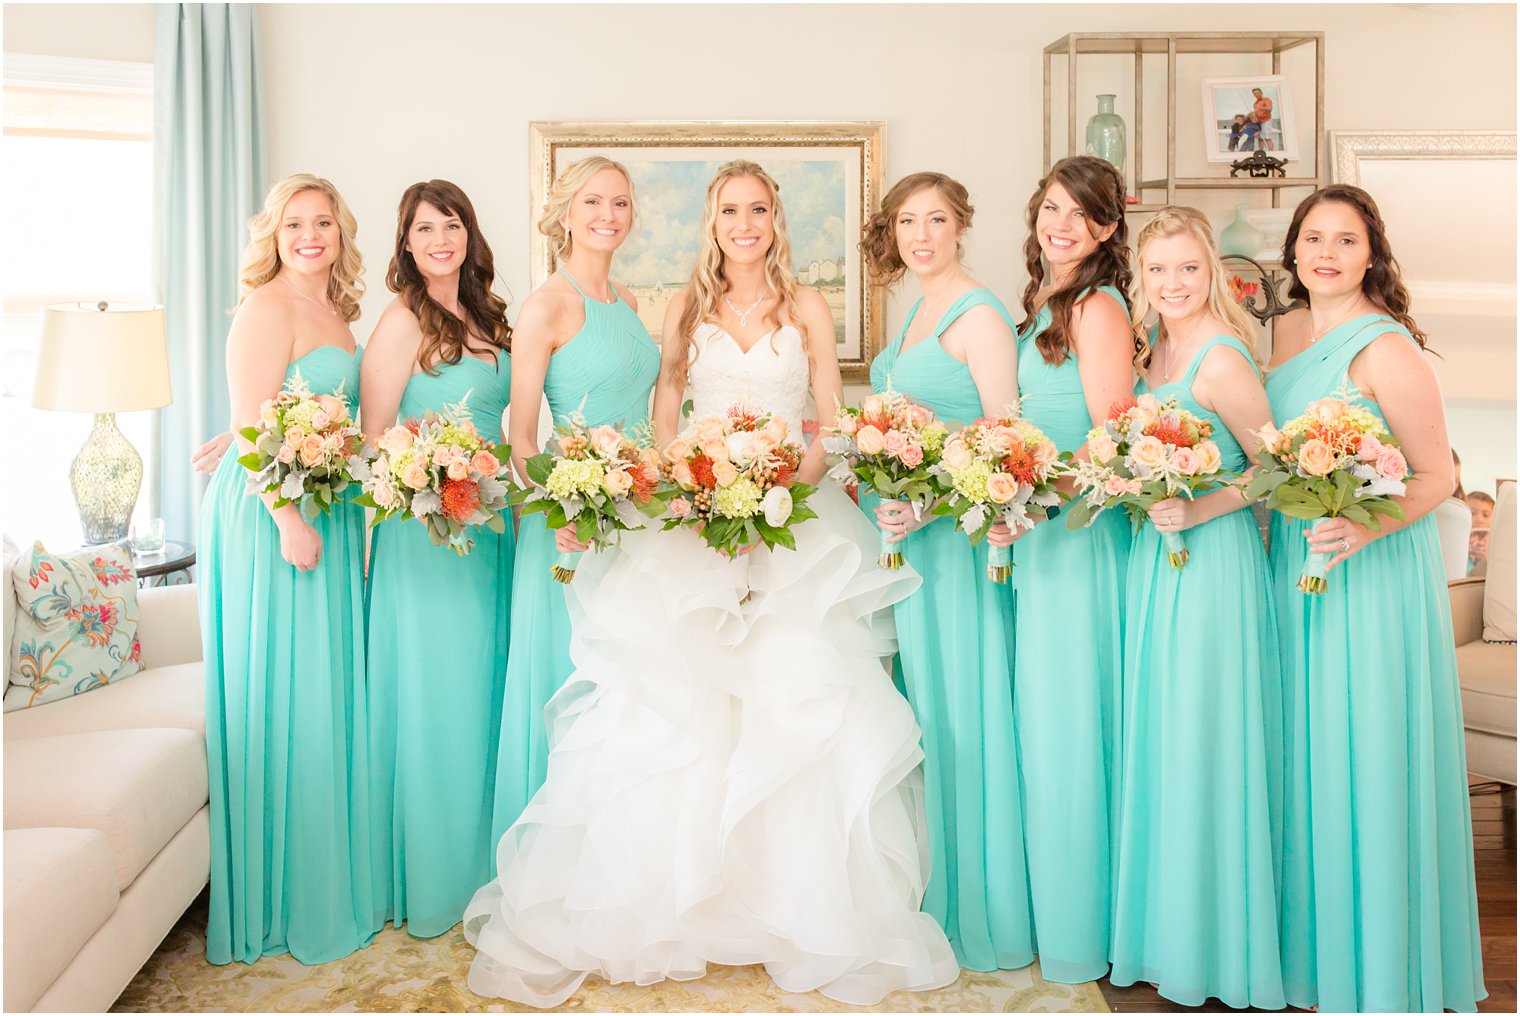 bride and bridesmaids with bouquets by Gig Morris Florist